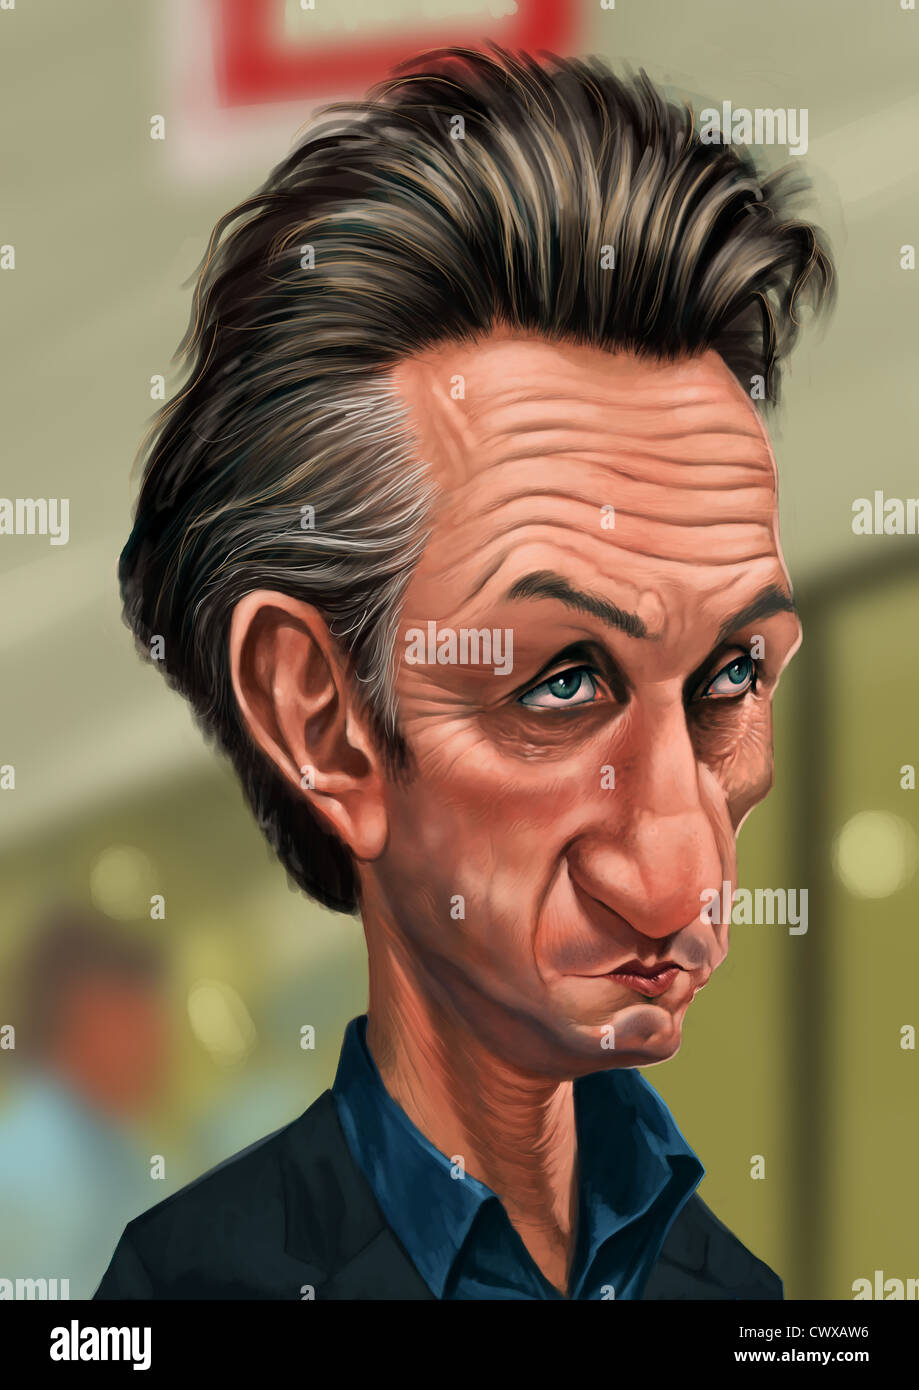 Caricature from actor Sean Penn, digital painted image Stock Photo